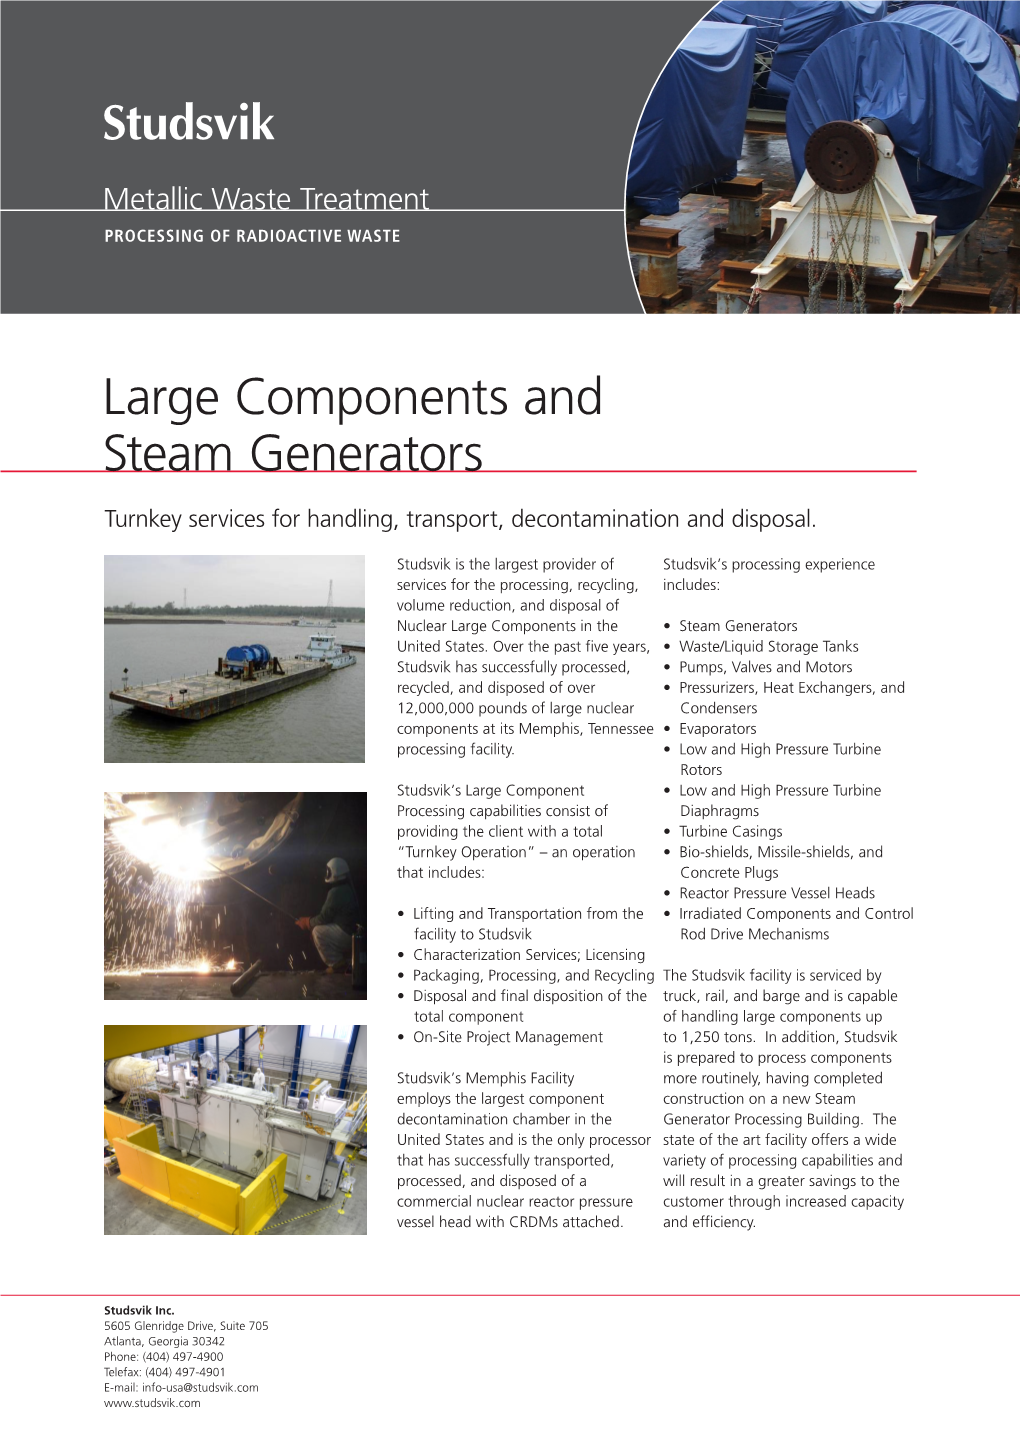 Large Components and Steam Generators